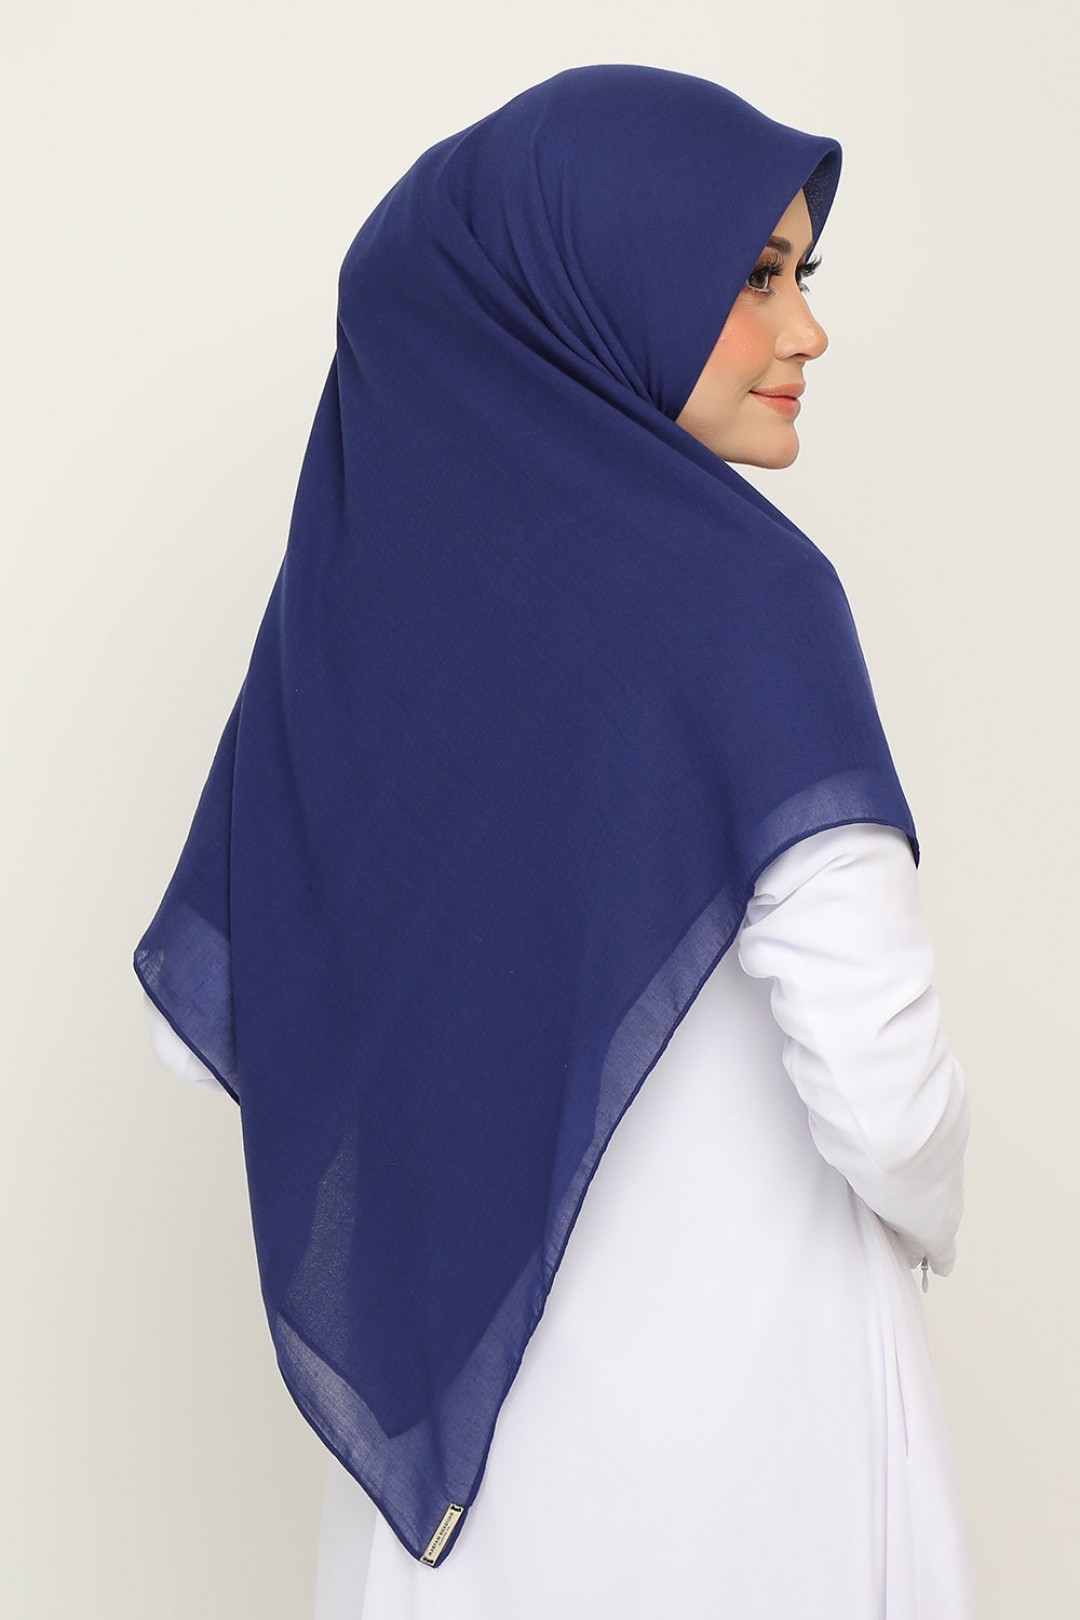 As-Is Classic Bawal Royal Blue